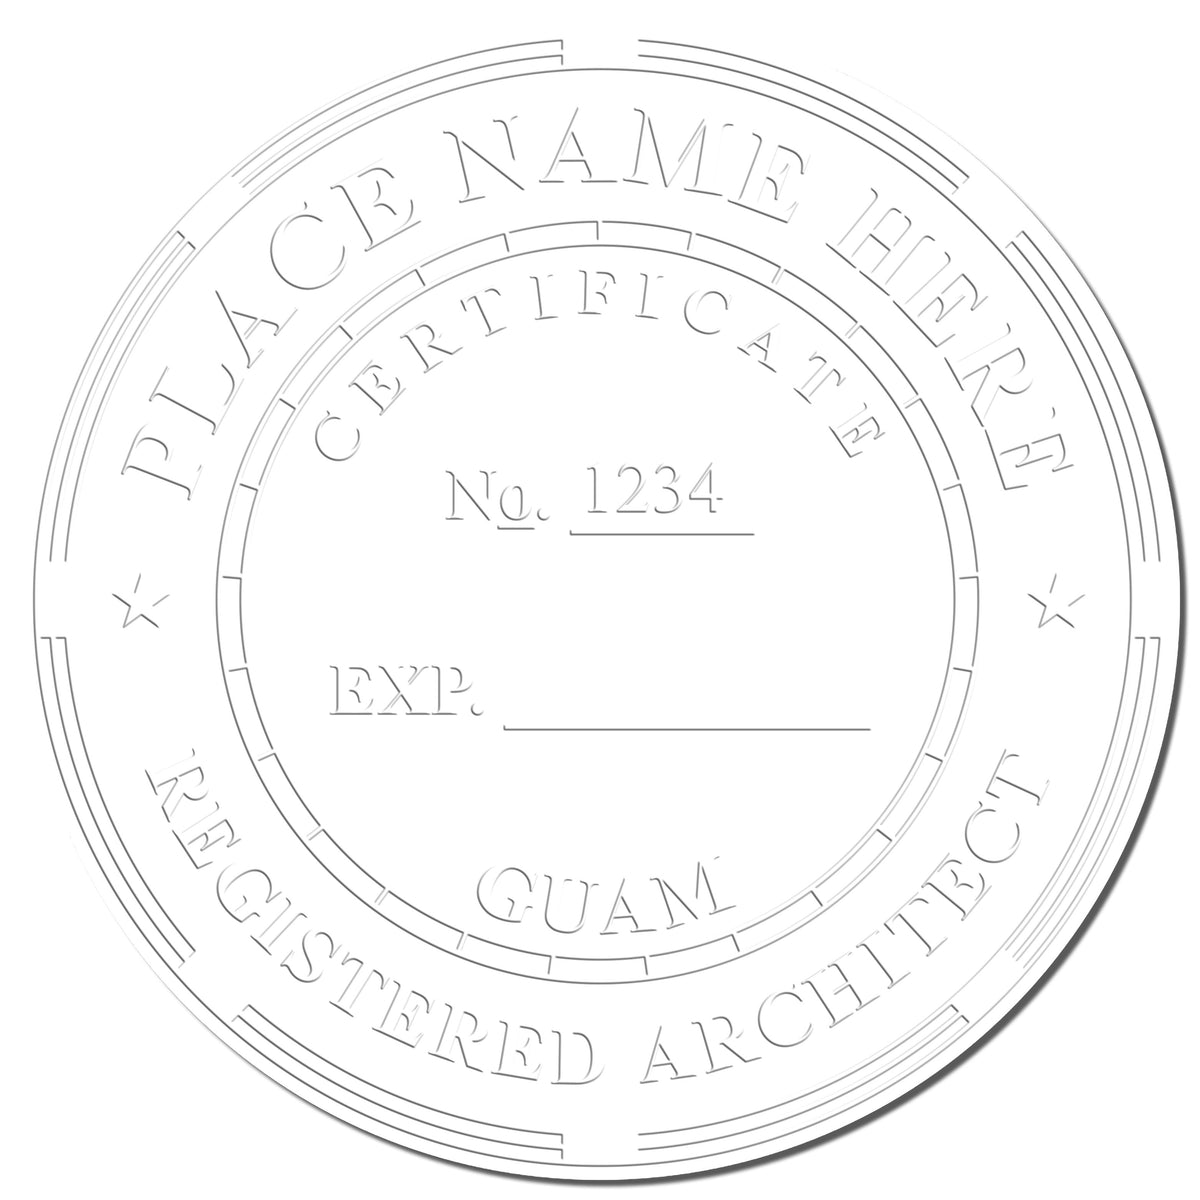 This paper is stamped with a sample imprint of the State of Guam Architectural Seal Embosser, signifying its quality and reliability.